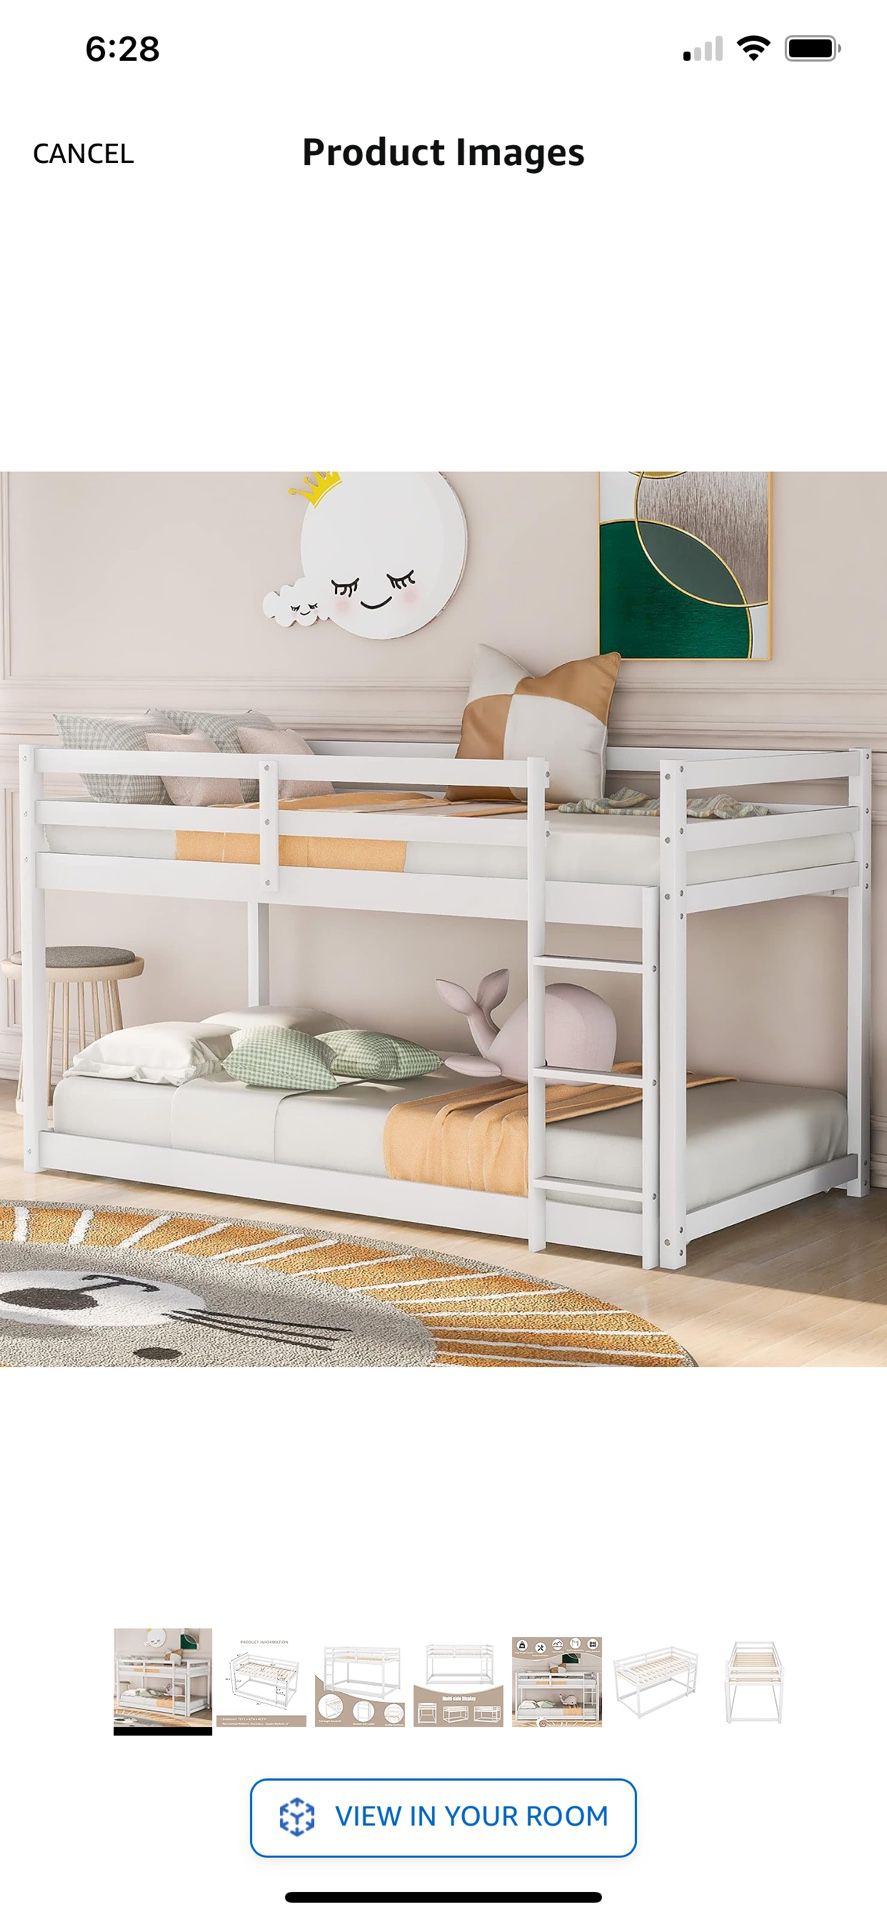 bunk bed twin over twin 